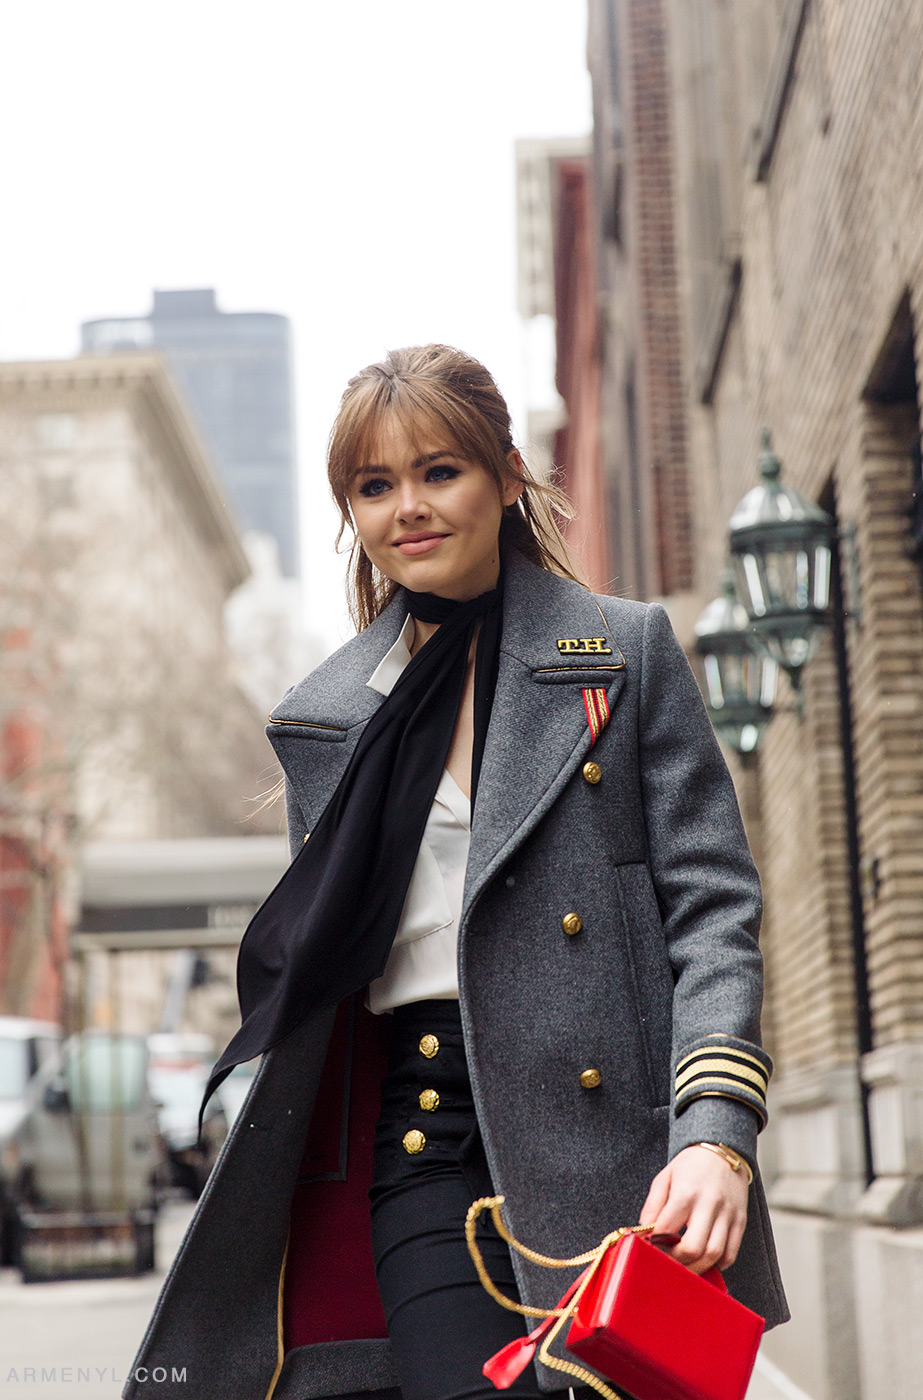 Street style Kristina Bazan at New York Fashion Week in Grey Tommy Hilfiger Blazer at Tommy Hilfiger FW 16 show in New York City photographed by Armenyl.com